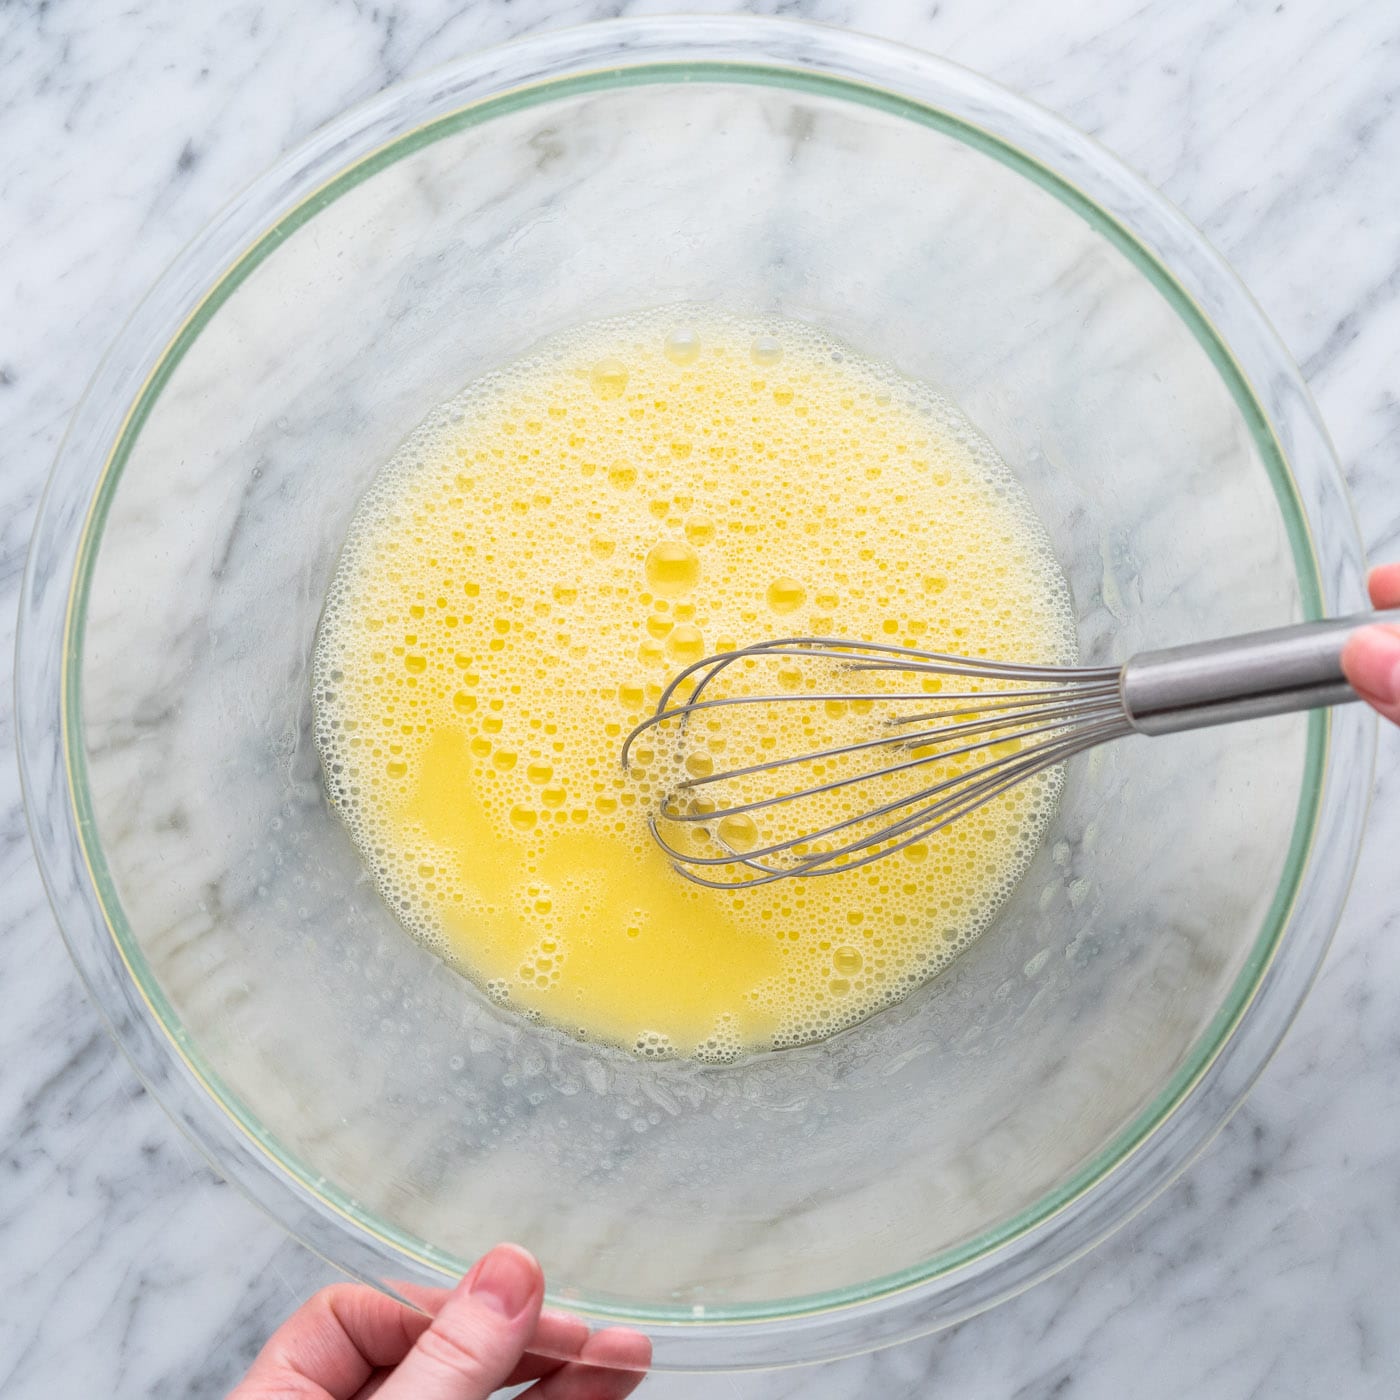 whisking egg, water, and oil in a bowl